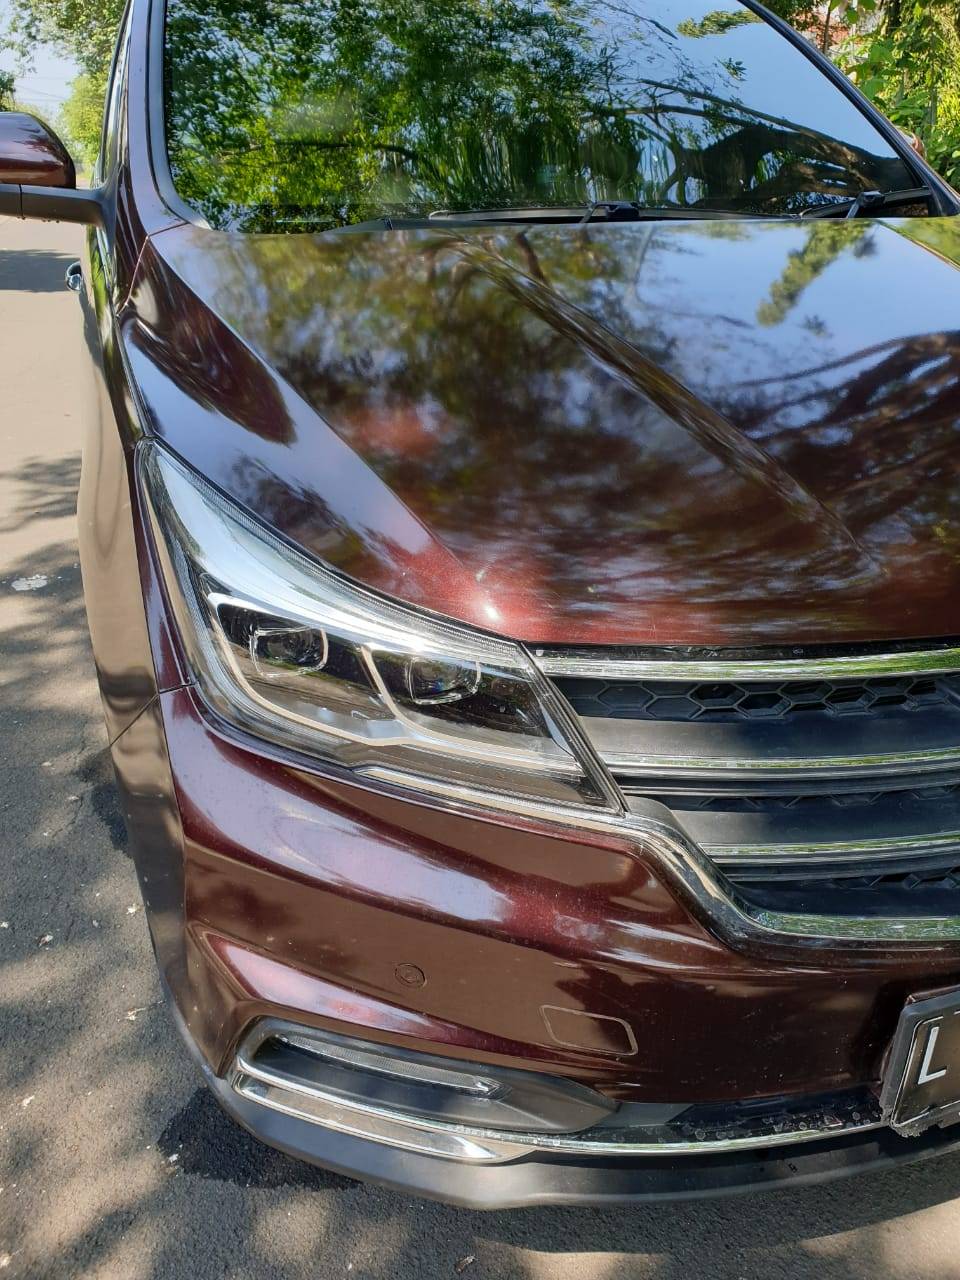 Old 2018 Wuling Cortez 1.8 L Lux i-AMT 1.8 L Lux i-AMT